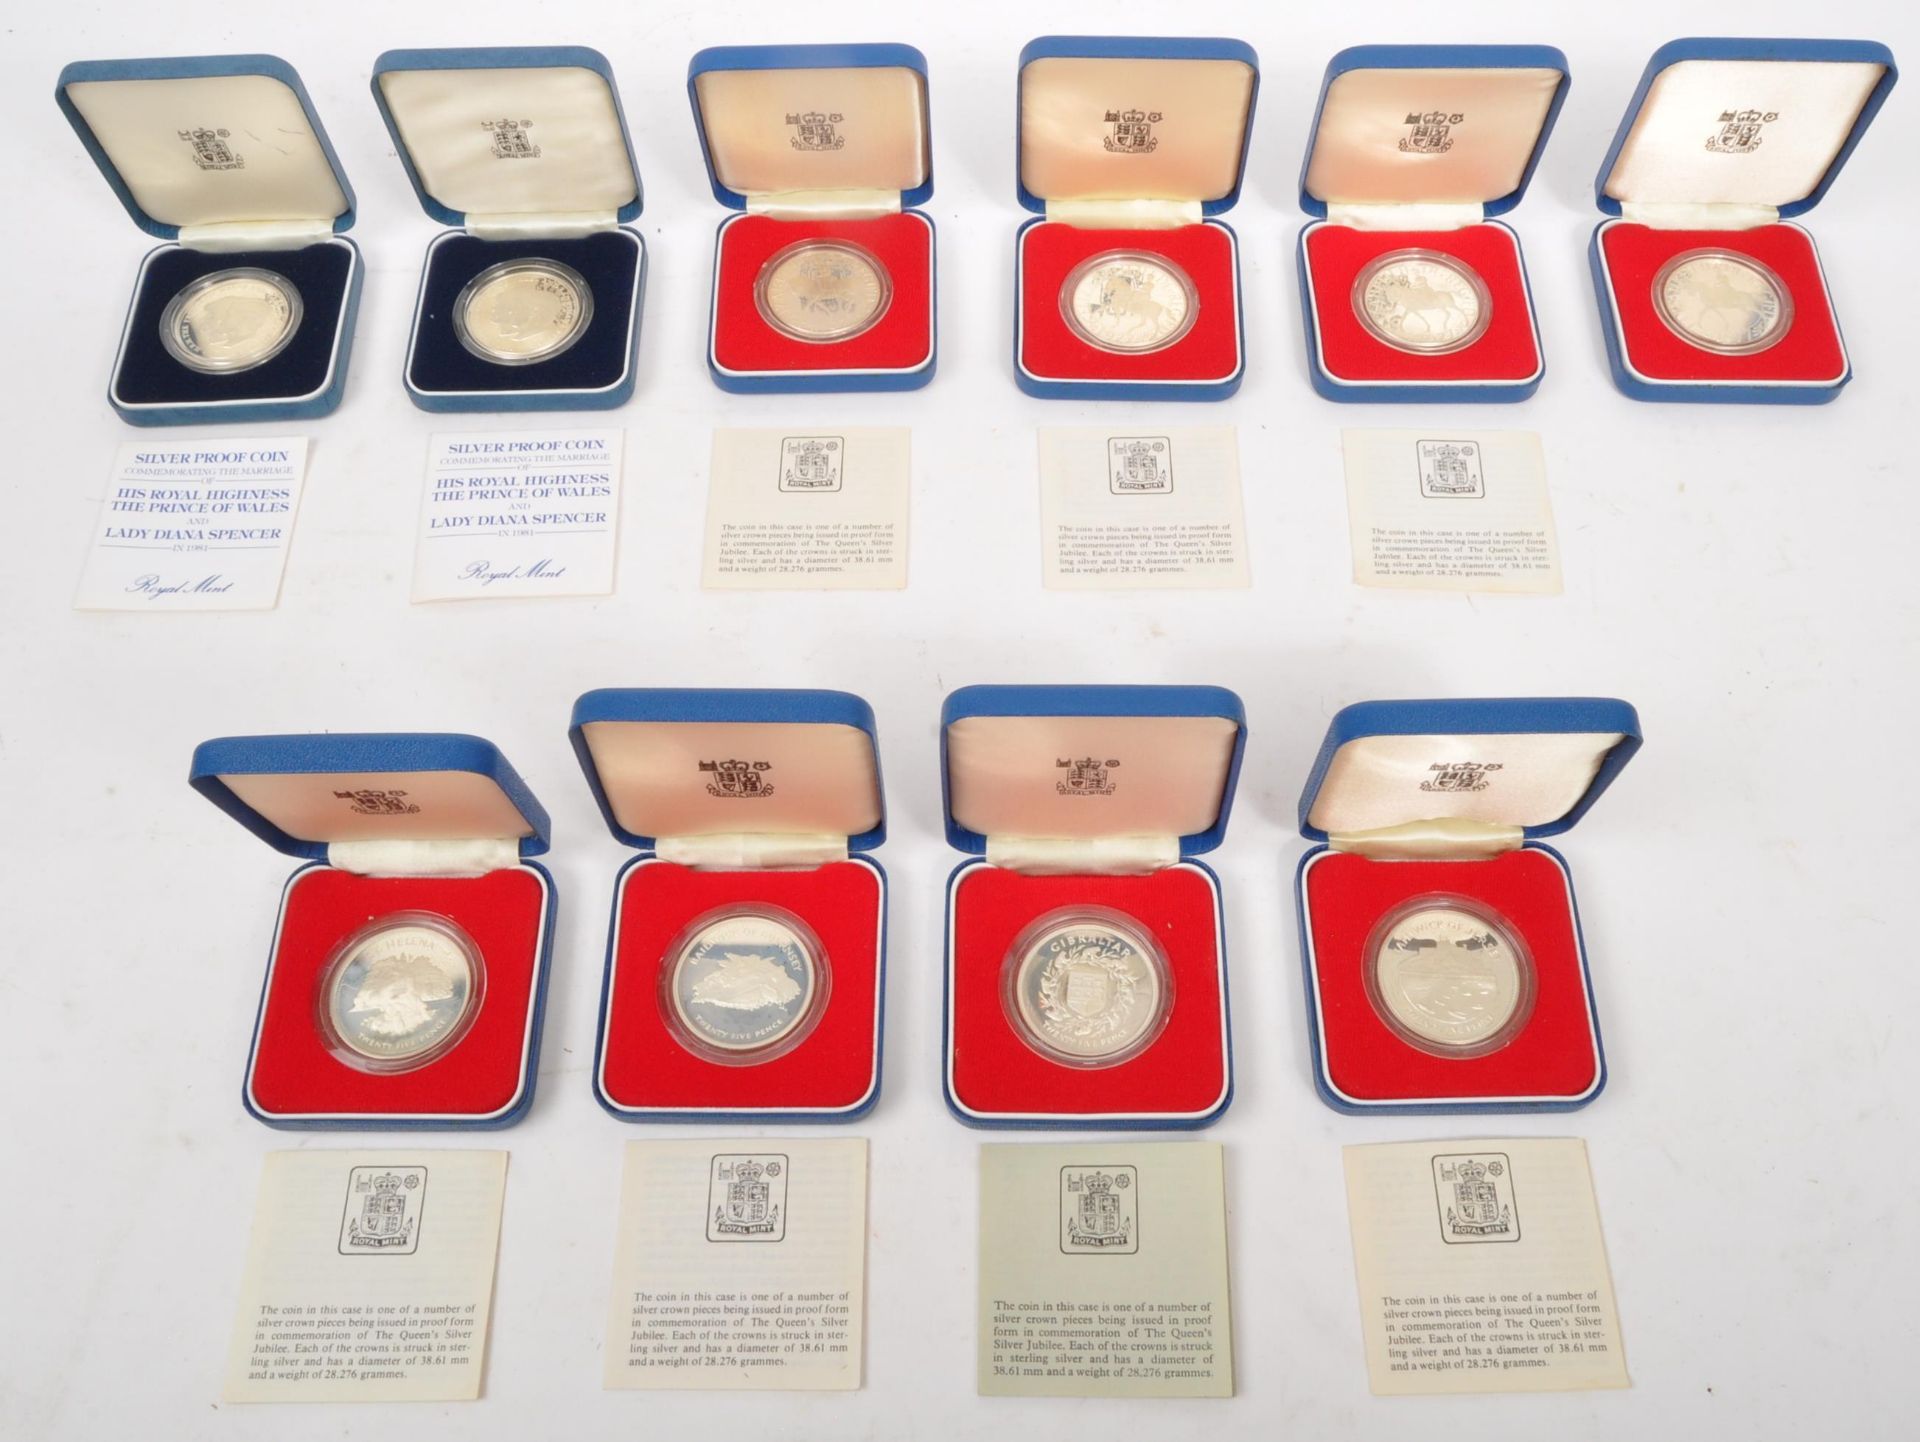 A COLLECTION OF TEN 1977 ROYAL MINT SILVER PROOF COINS UK